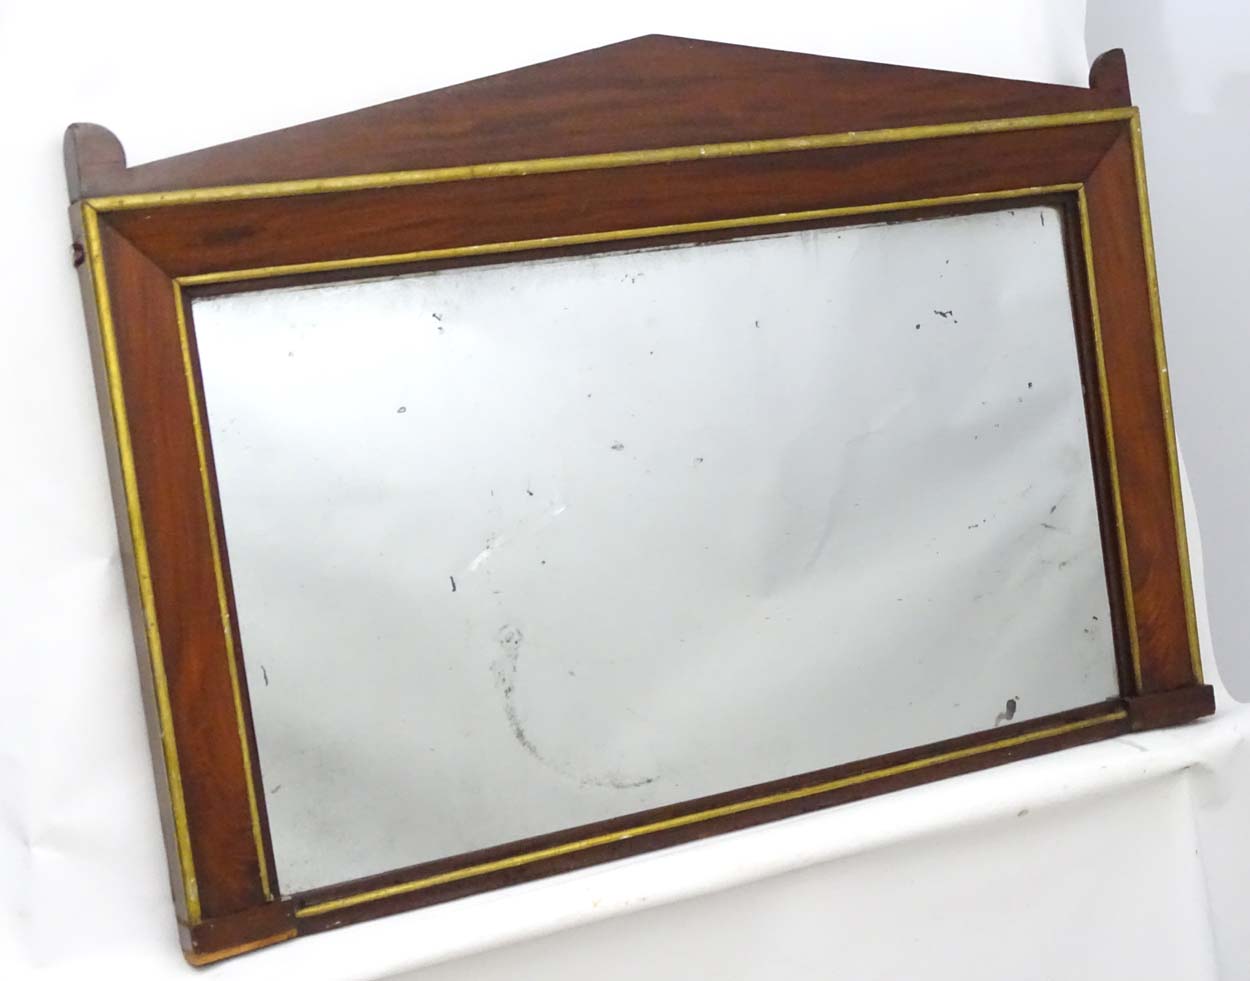 A Regency mahogany and gilt over mantle mirror.